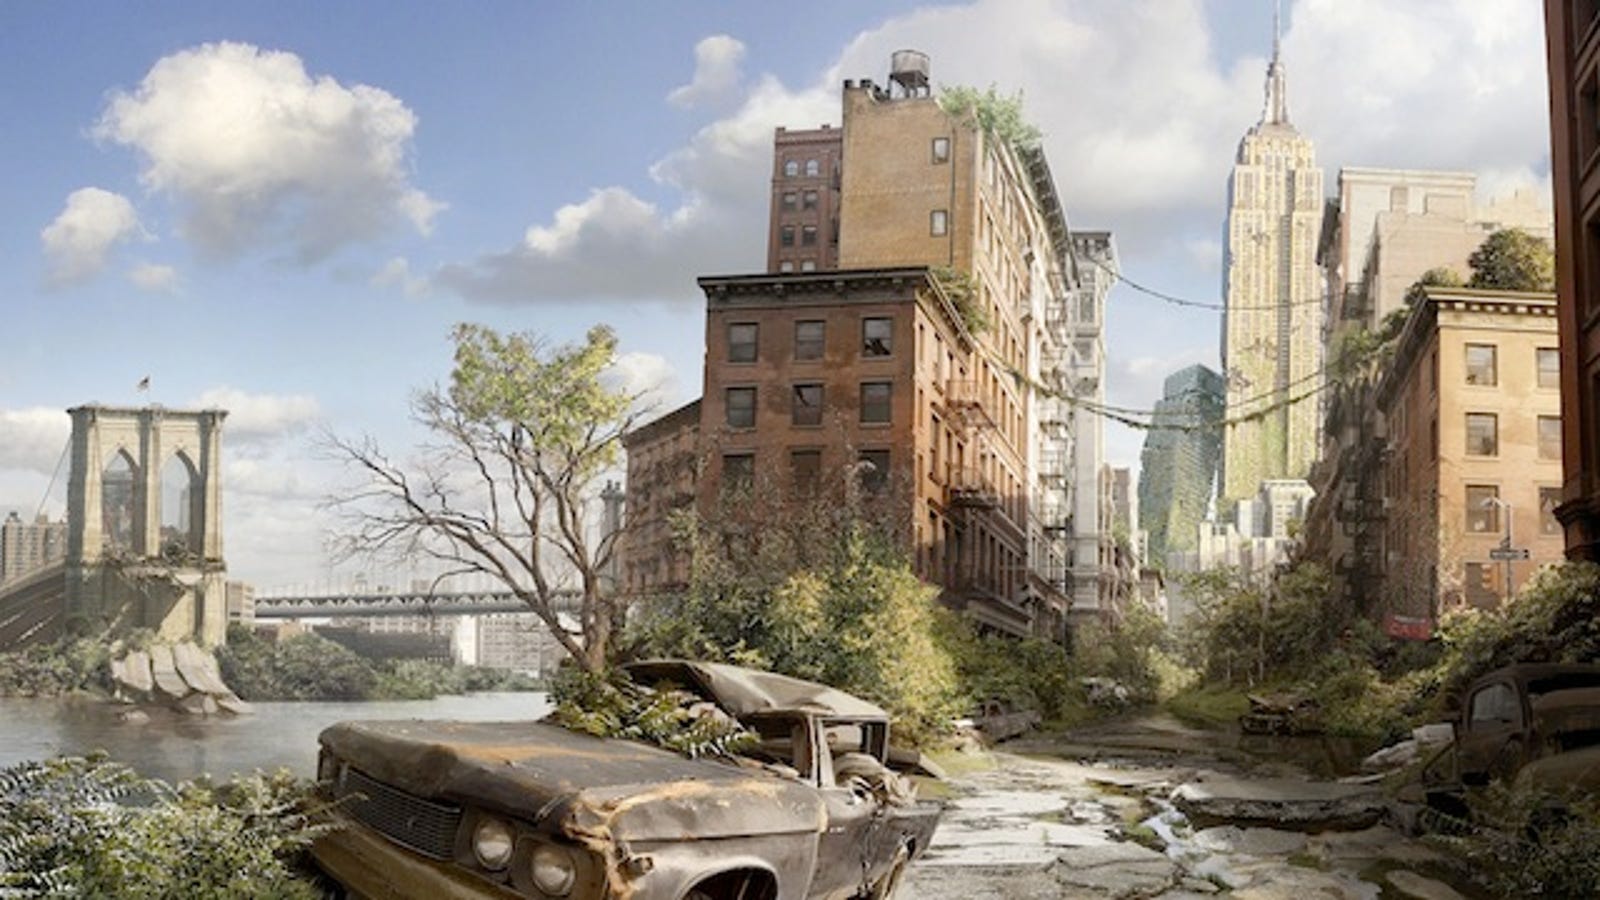 Explore the Trashed Magnificence of Dystopia in these Wallpapers